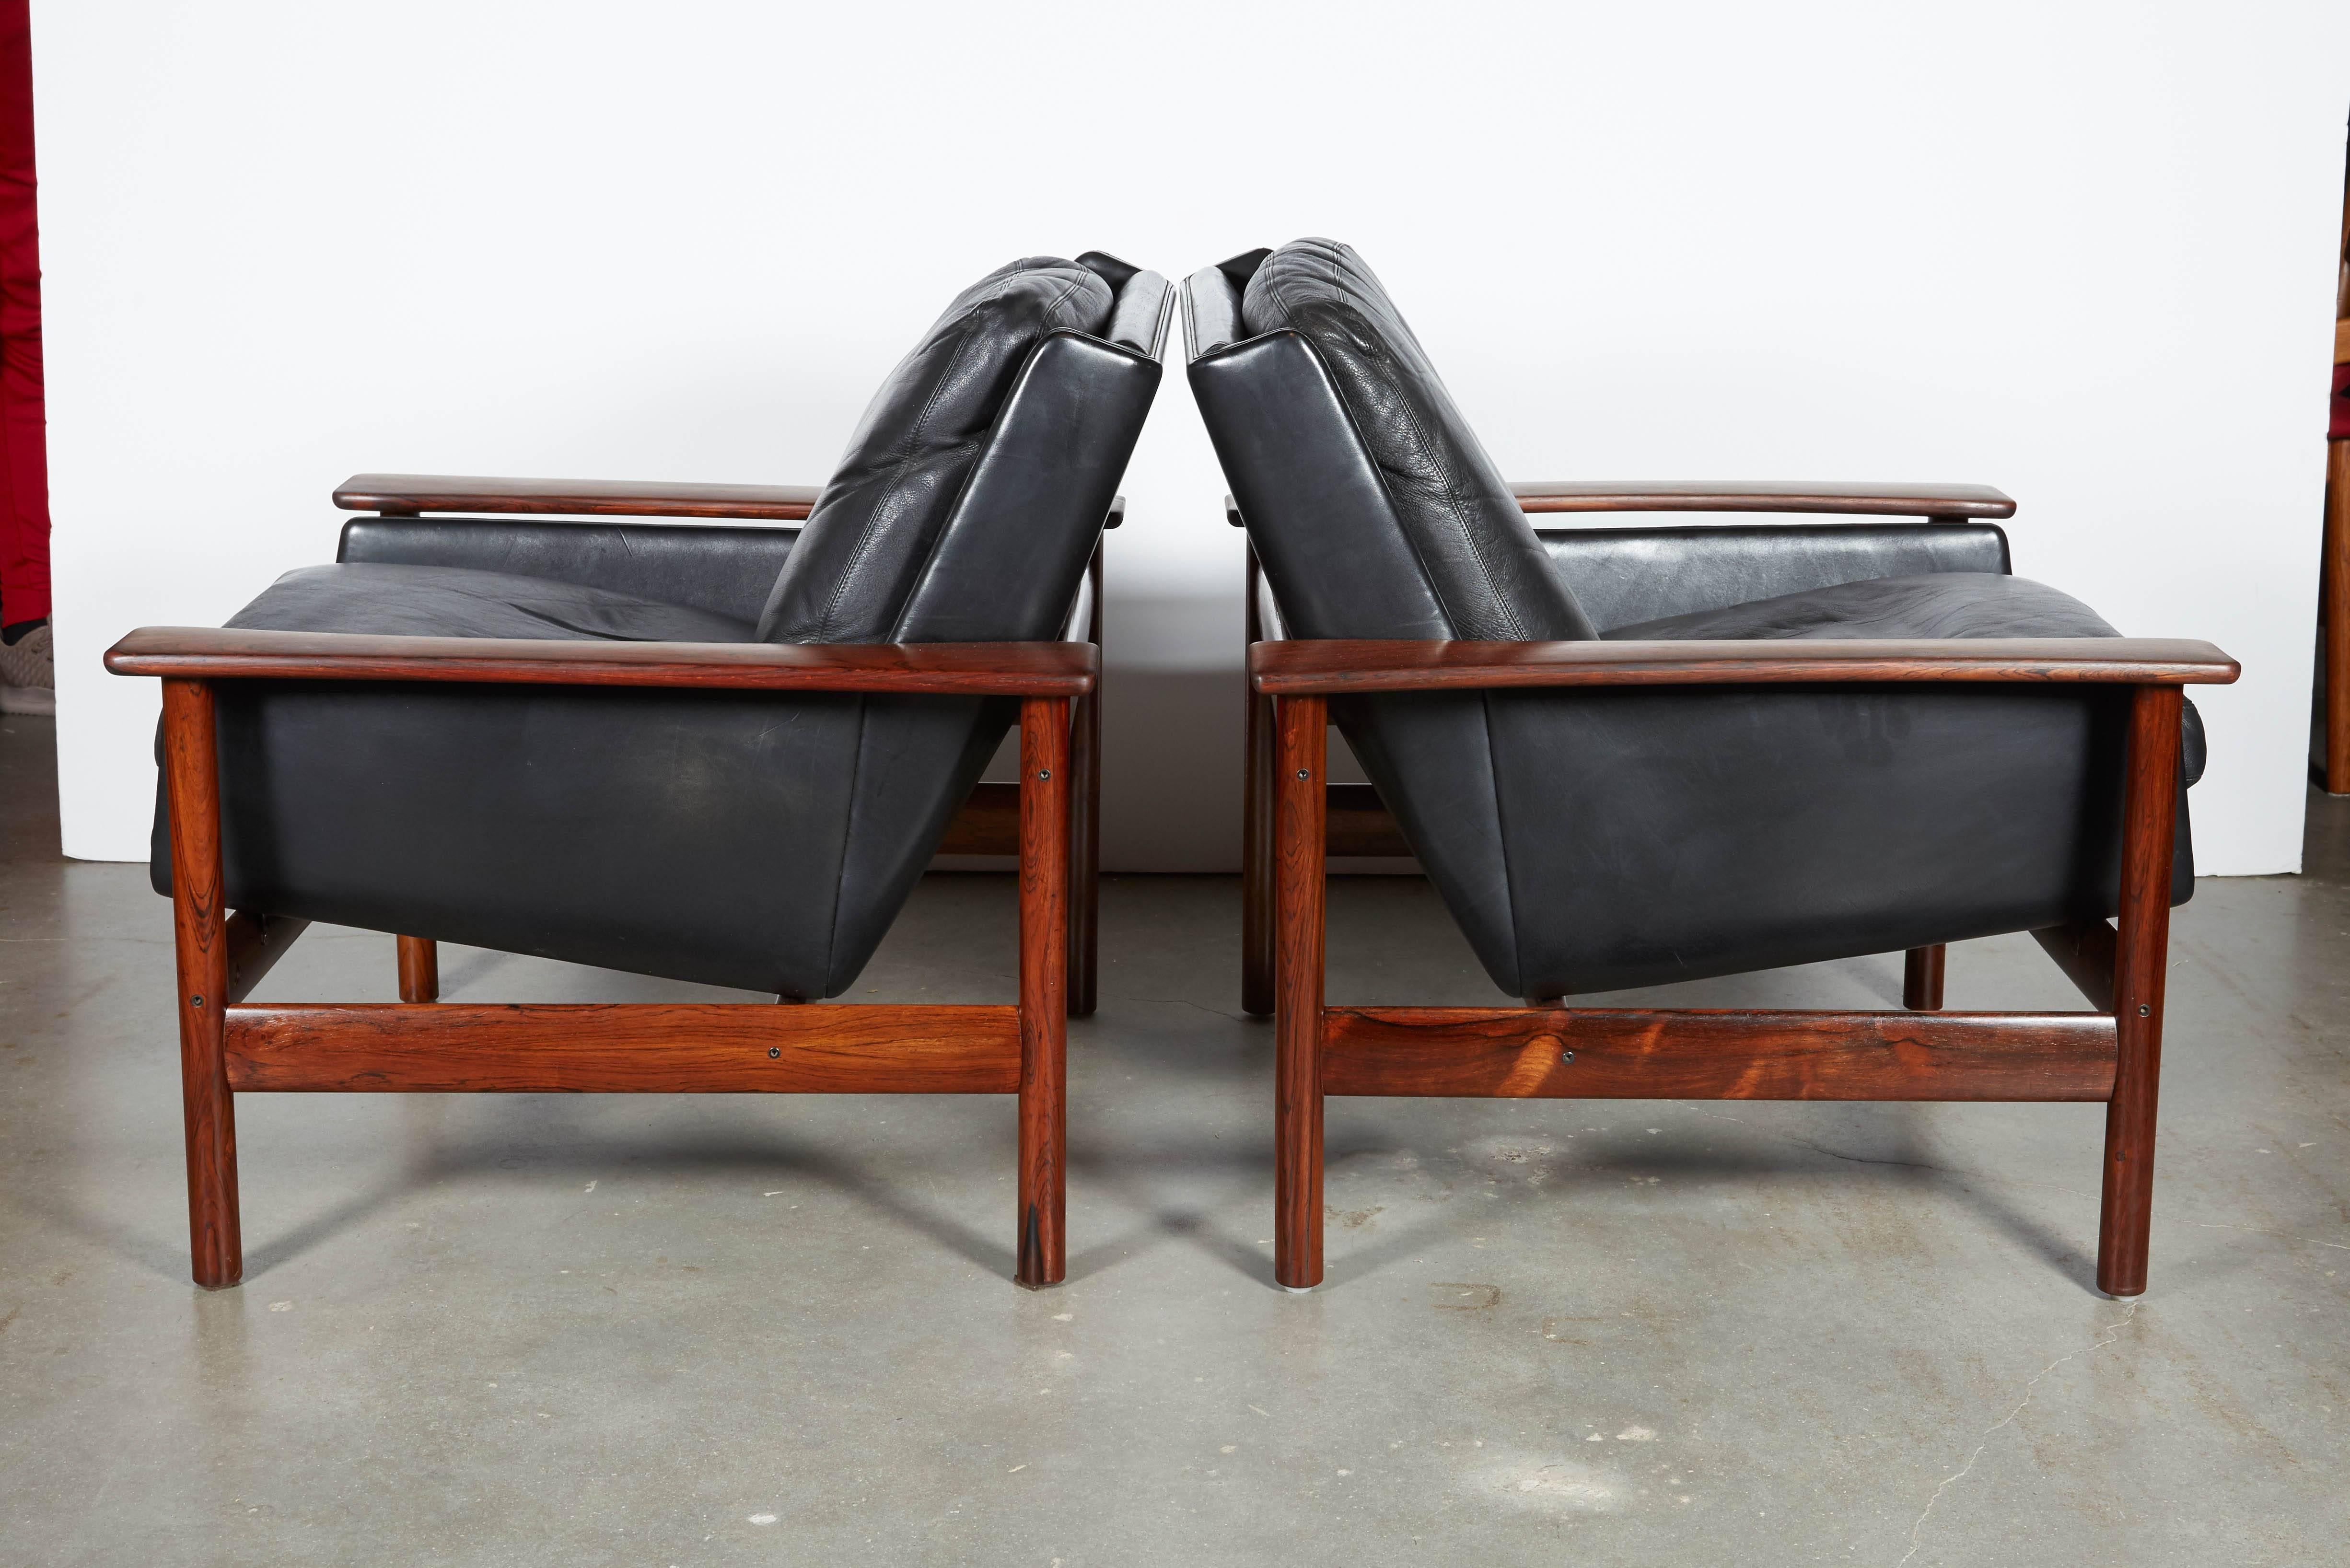 Sven Ivar Dysthe 7001 leather lounge chairs, pair. In excellent condition.
Original leather.